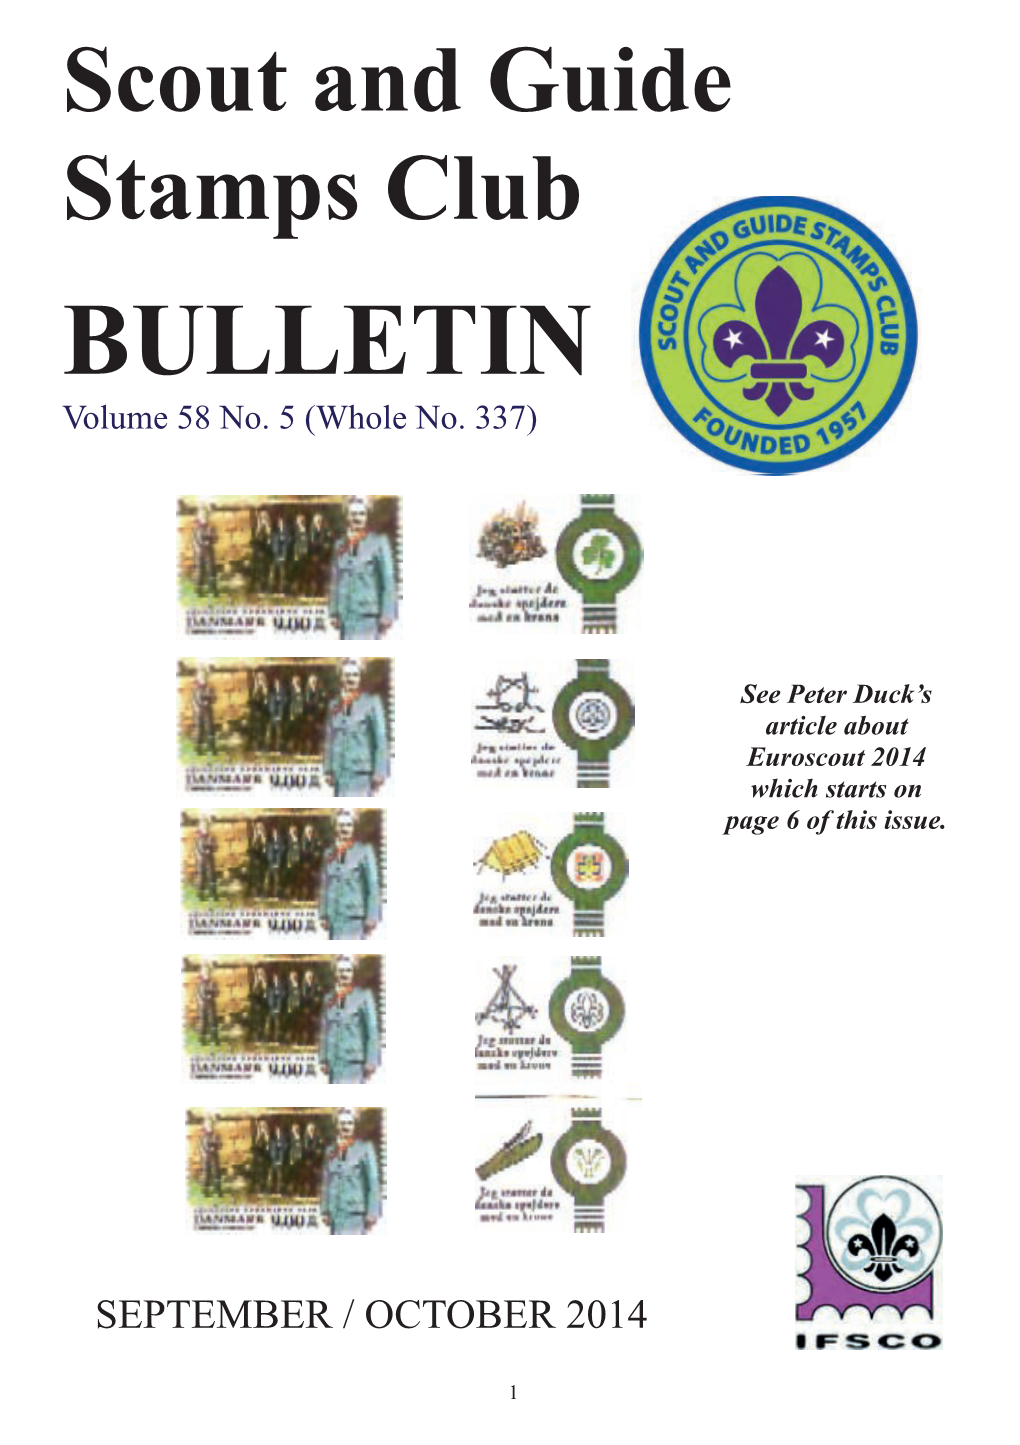 Scout and Guide Stamps Club BULLETIN #337